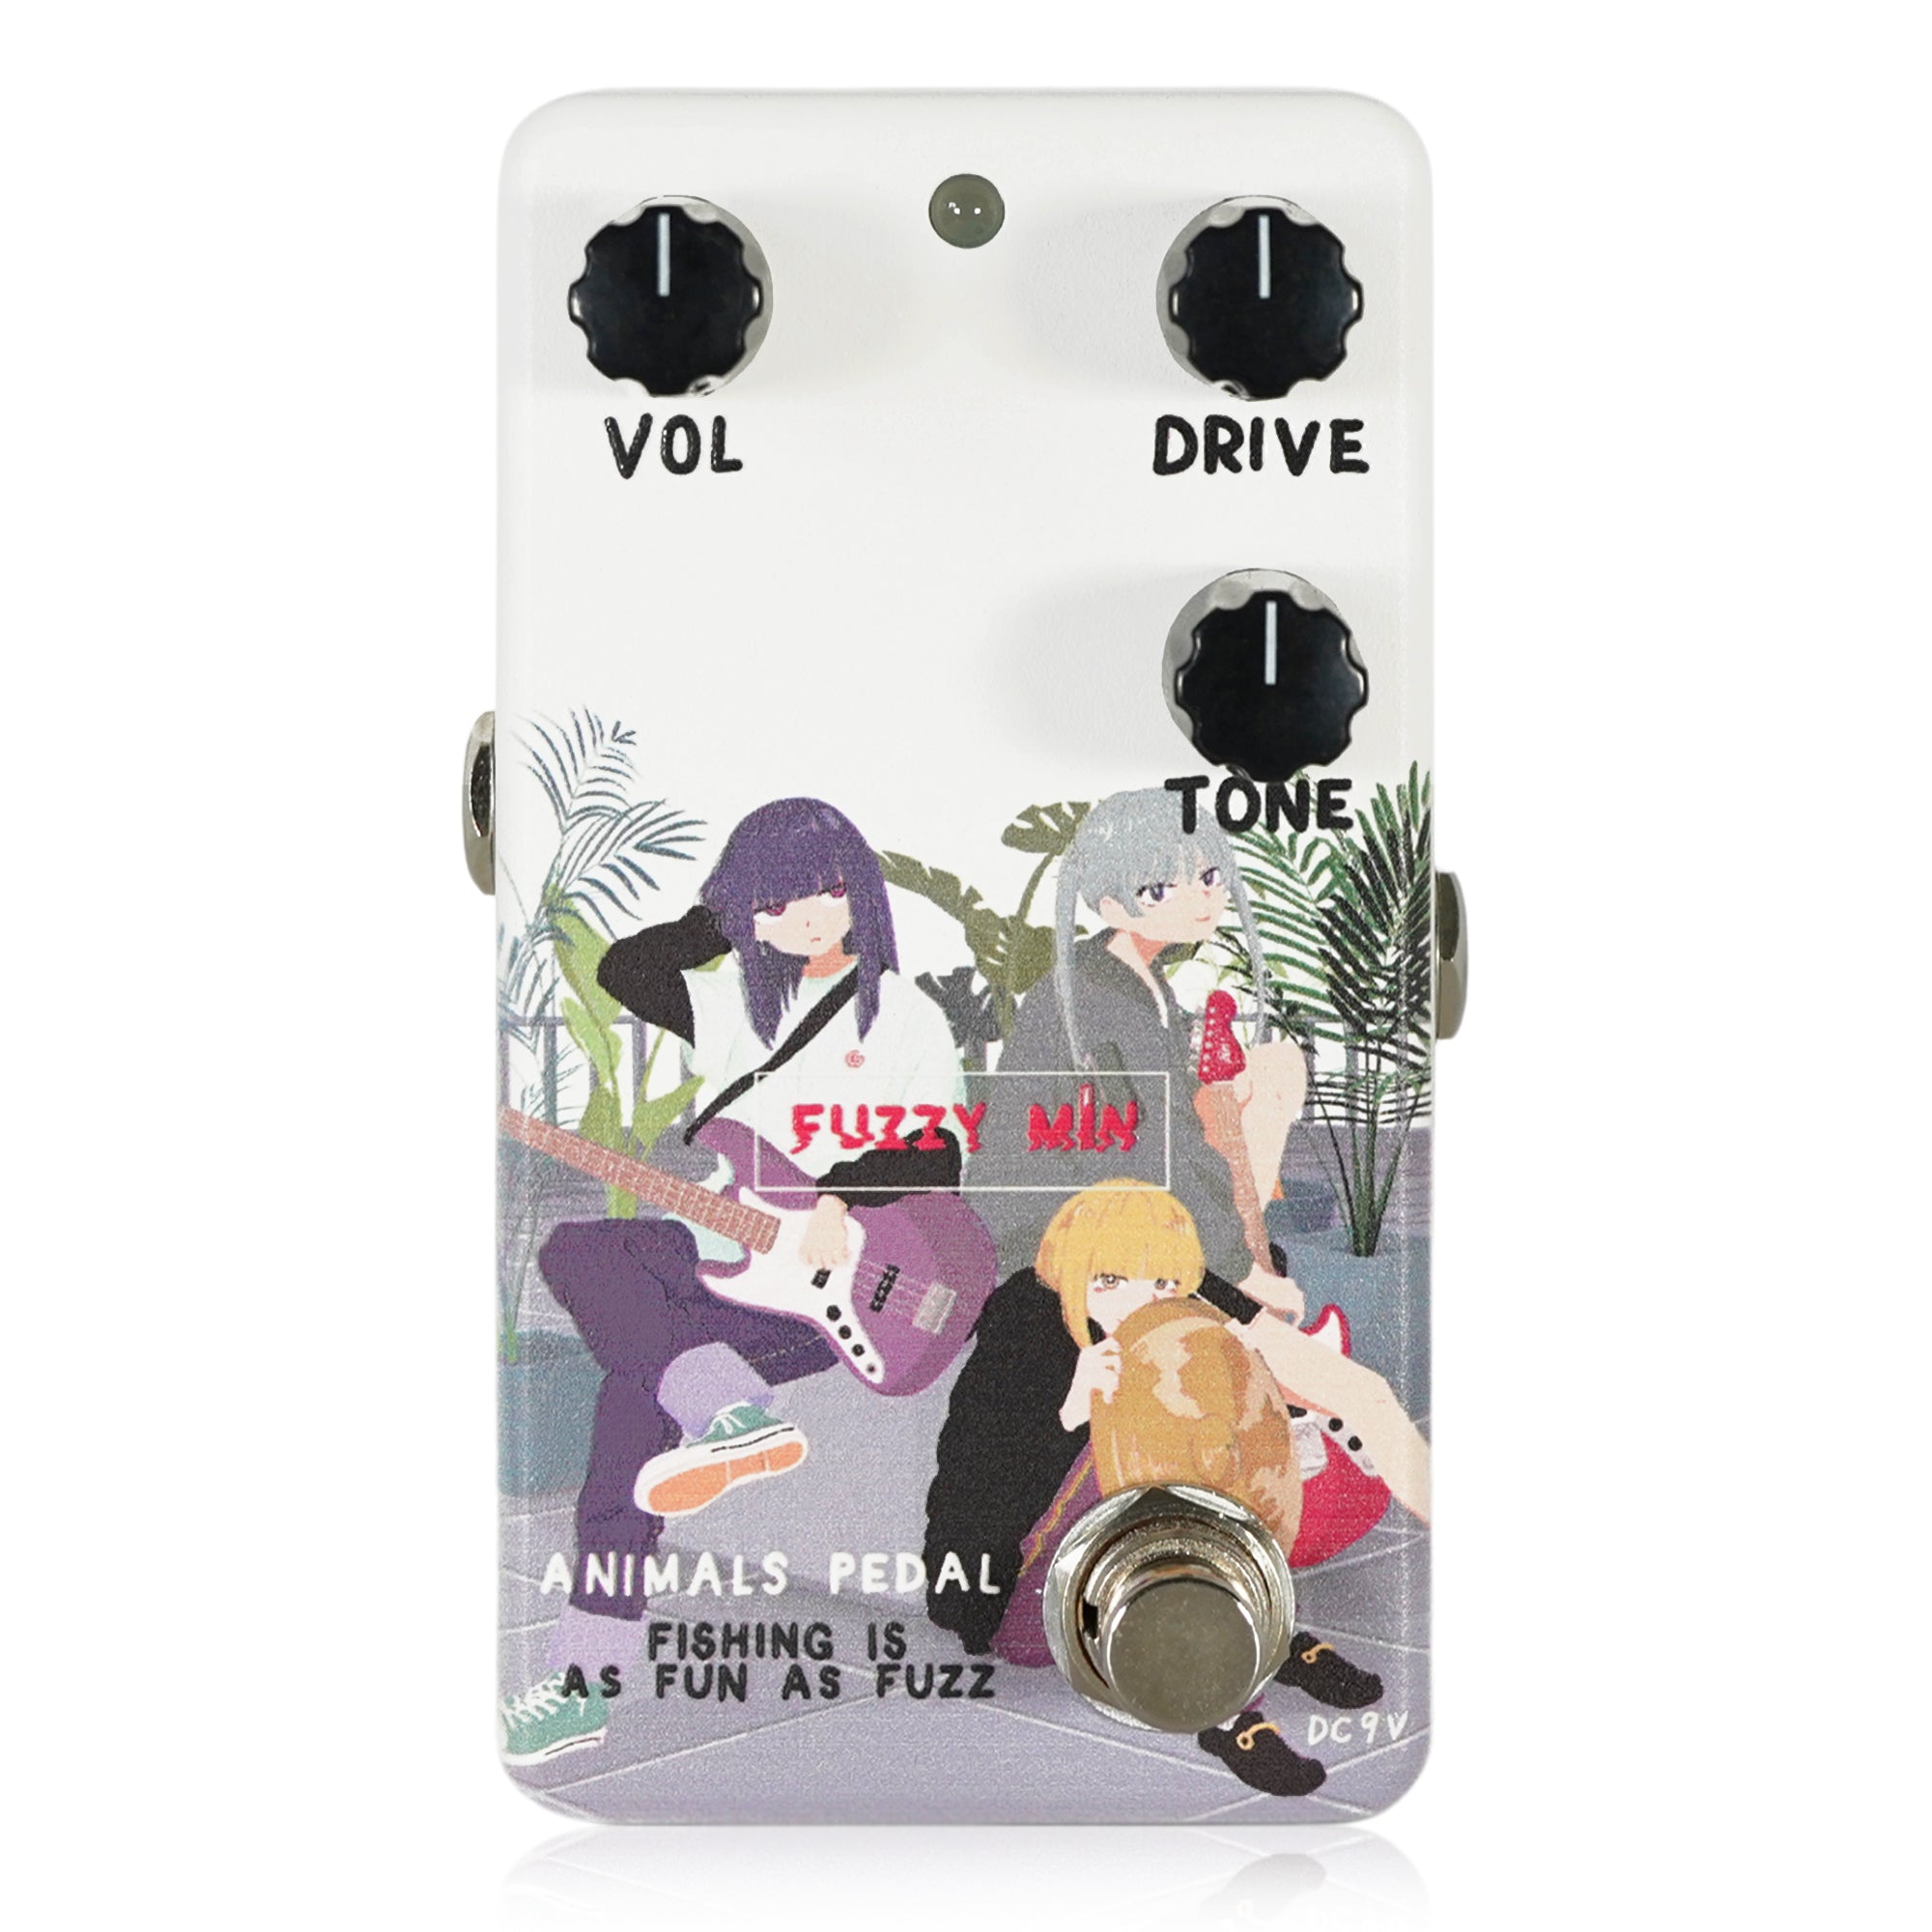 Animals Pedal Custom Illustrated 049 FISHING IS AS FUN AS FUZZ by ぶん 